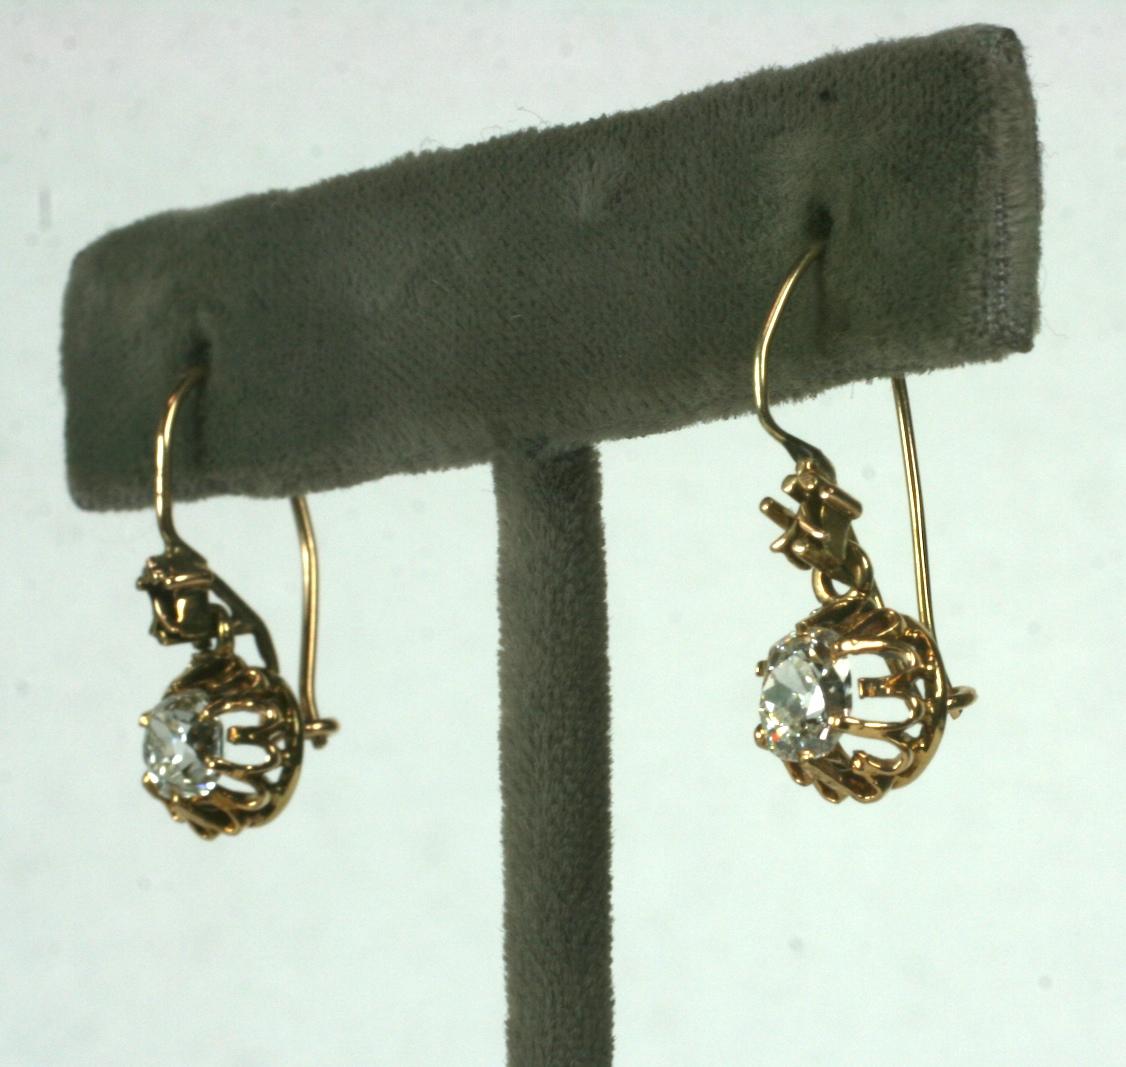 Wonderful Victorian Mine Diamond Earrings from the late 19th Century. Each diamond weighs conservatively .65 cts. for an approximate total weight of 1.30 carats. 
Bright clean diamonds with wonderful color. No visible defects or inclusions under 10